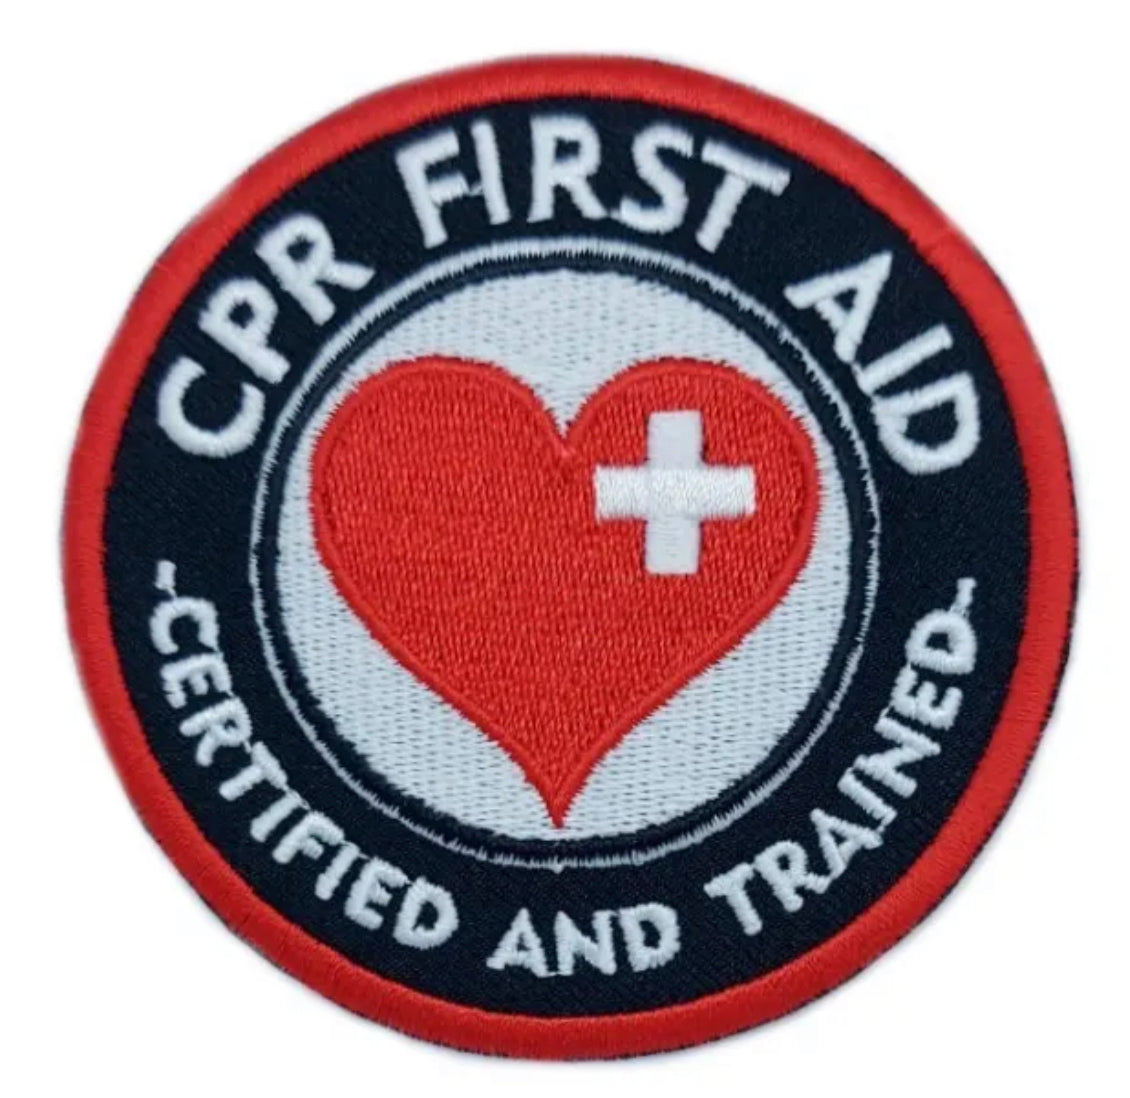 First Aid AED CPR Trained 100% Embroidered Patch Workplace Health & Safety  - F 150